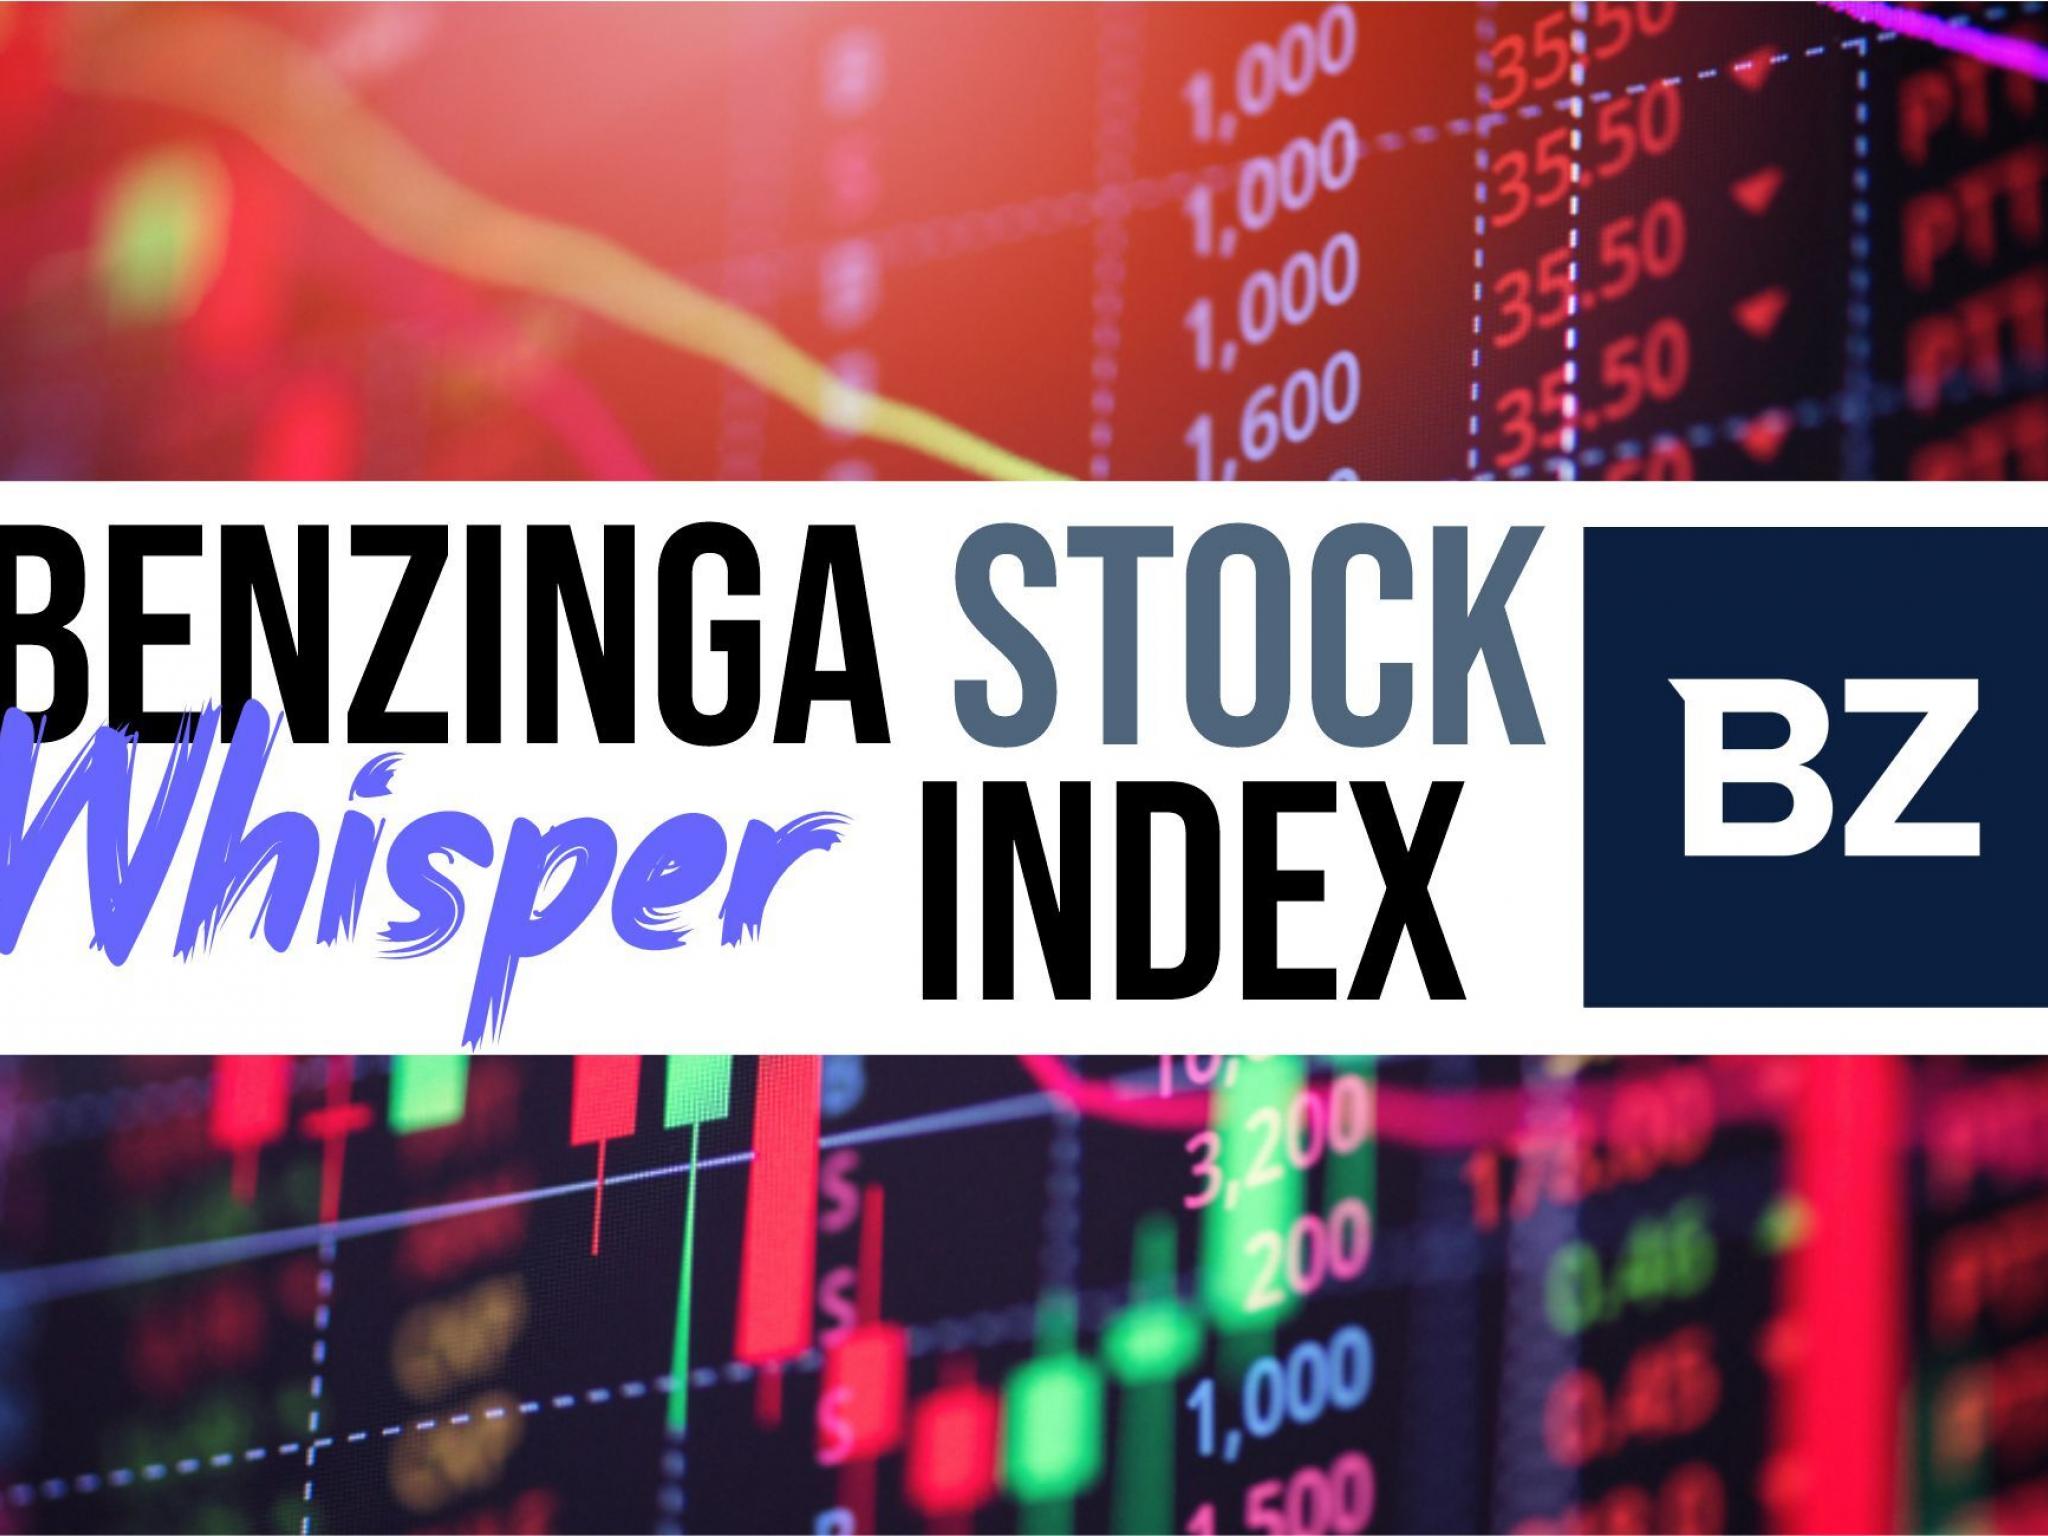  benzingas-stock-whisper-index-5-stocks-investors-are-secretly-monitoring-but-not-yet-talking-about 